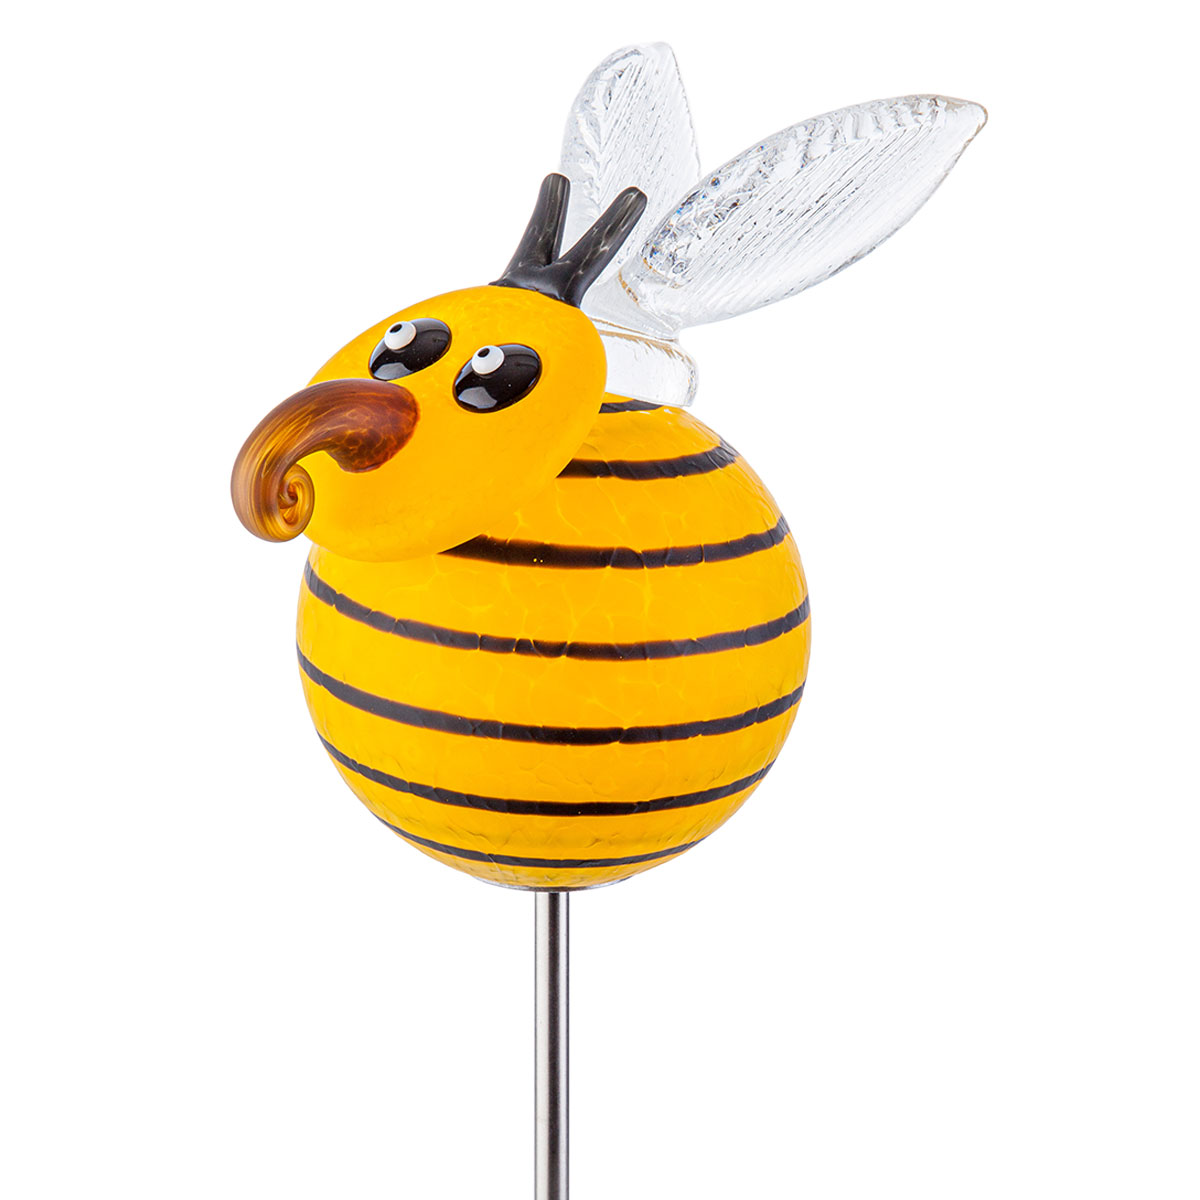 oo_buzz-on-stick_outdoor-sculpture_yellow_GM-2110